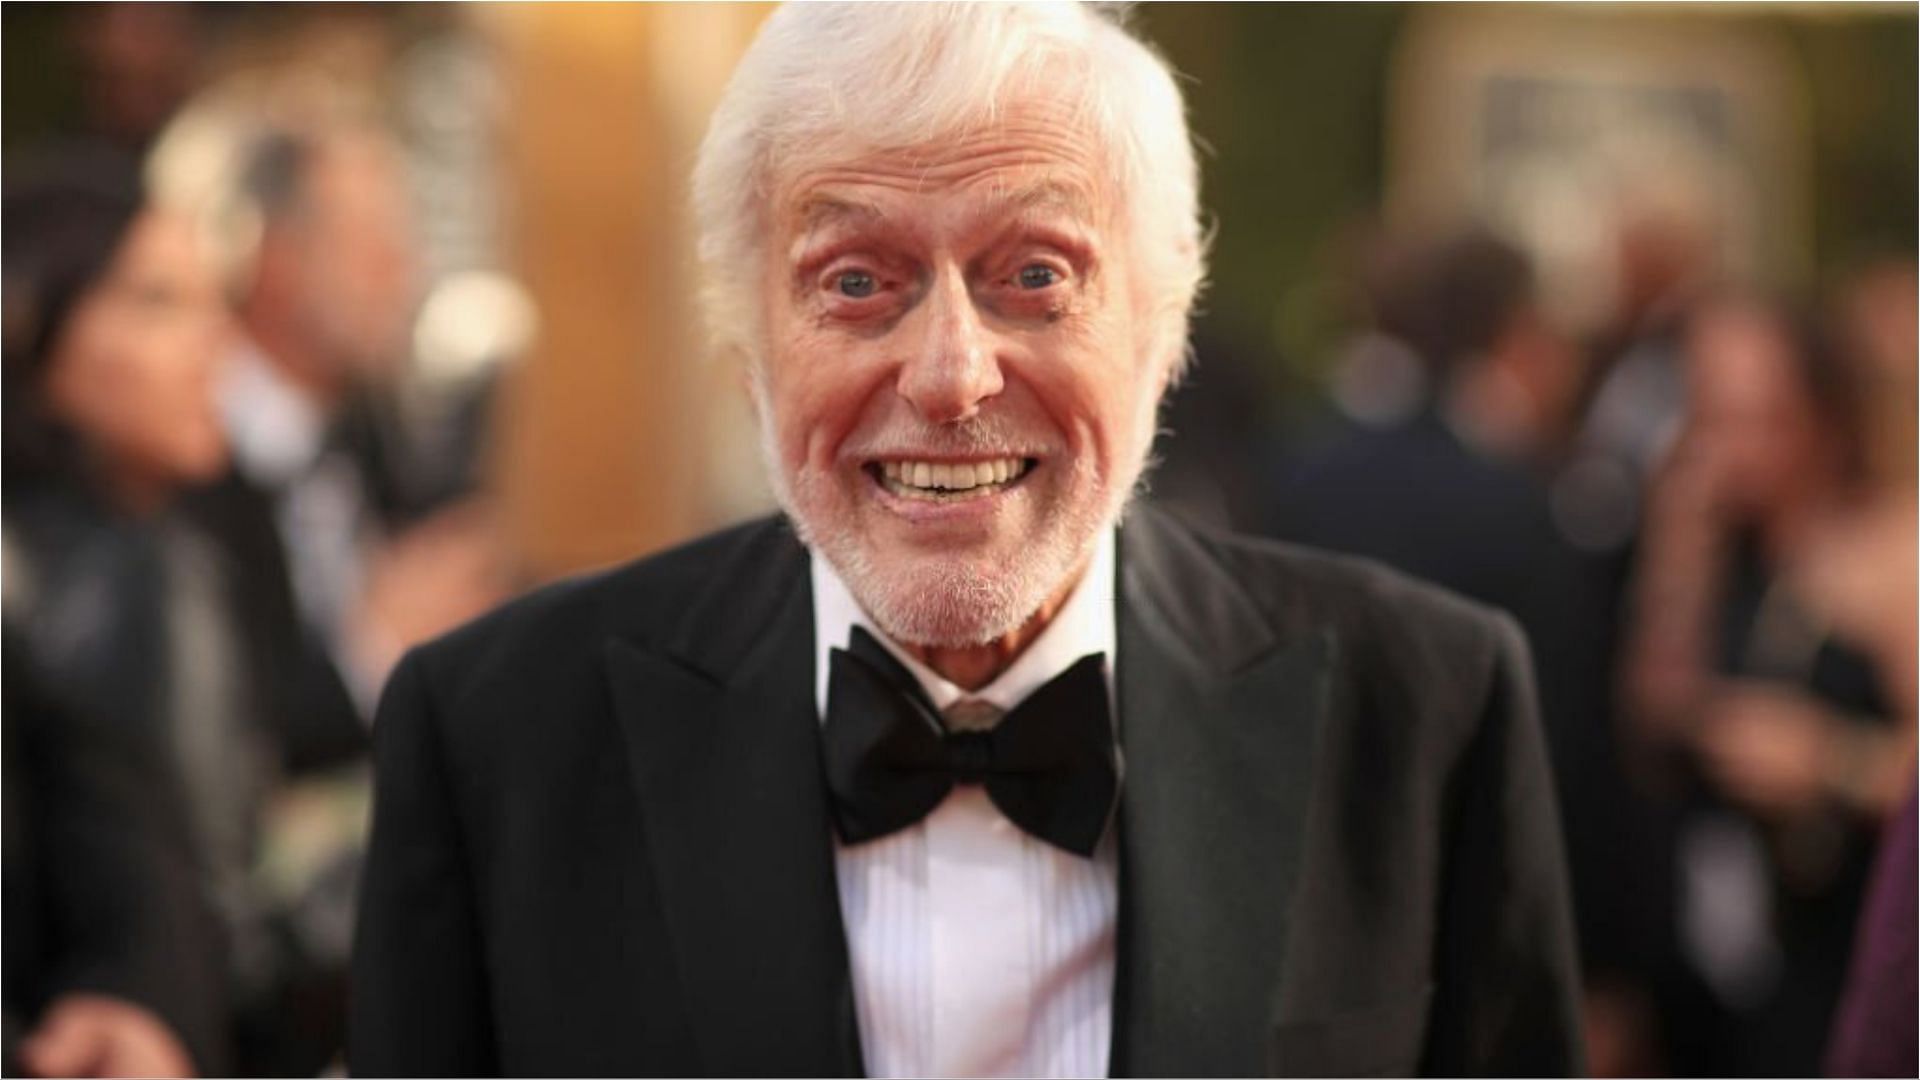 Dick Van Dyke met with an accident that left him injured (Image via Christopher Polk/Getty Images)